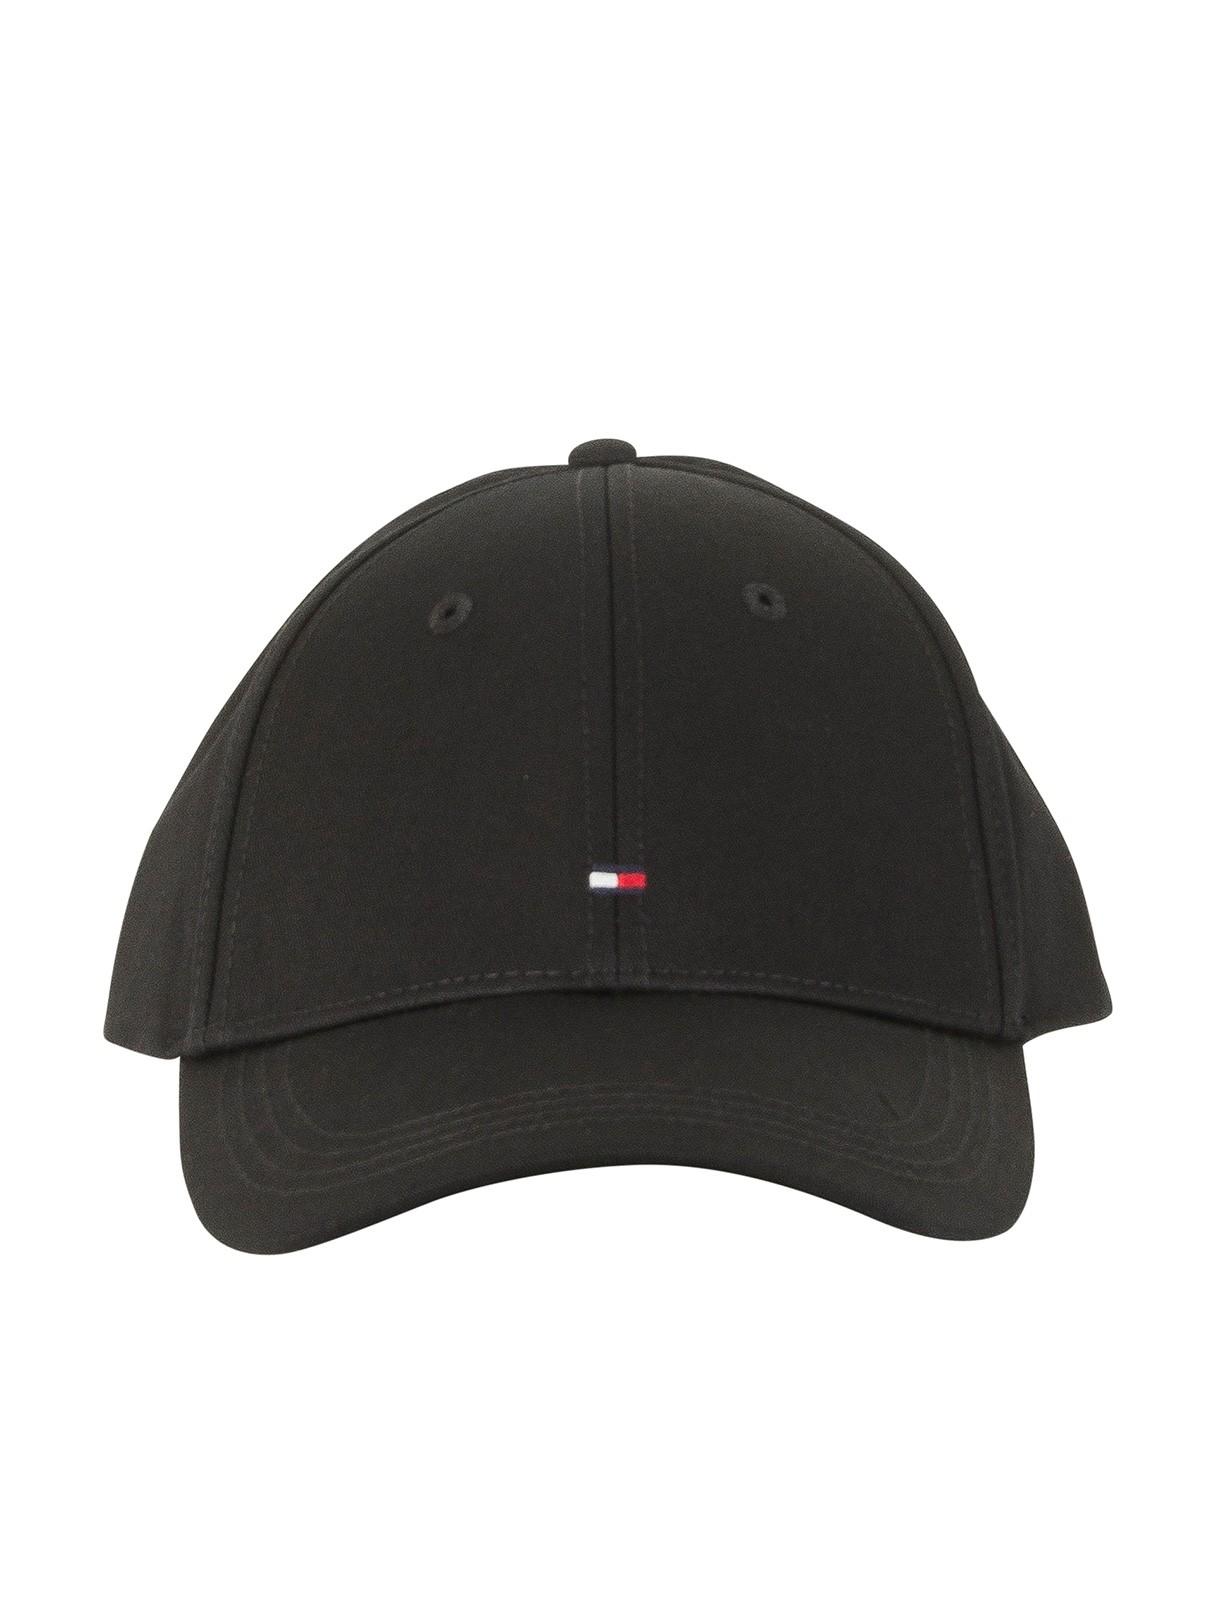 Tommy Hilfiger Cotton Classic Logo Baseball Cap in Black for Men - Save 31%  | Lyst